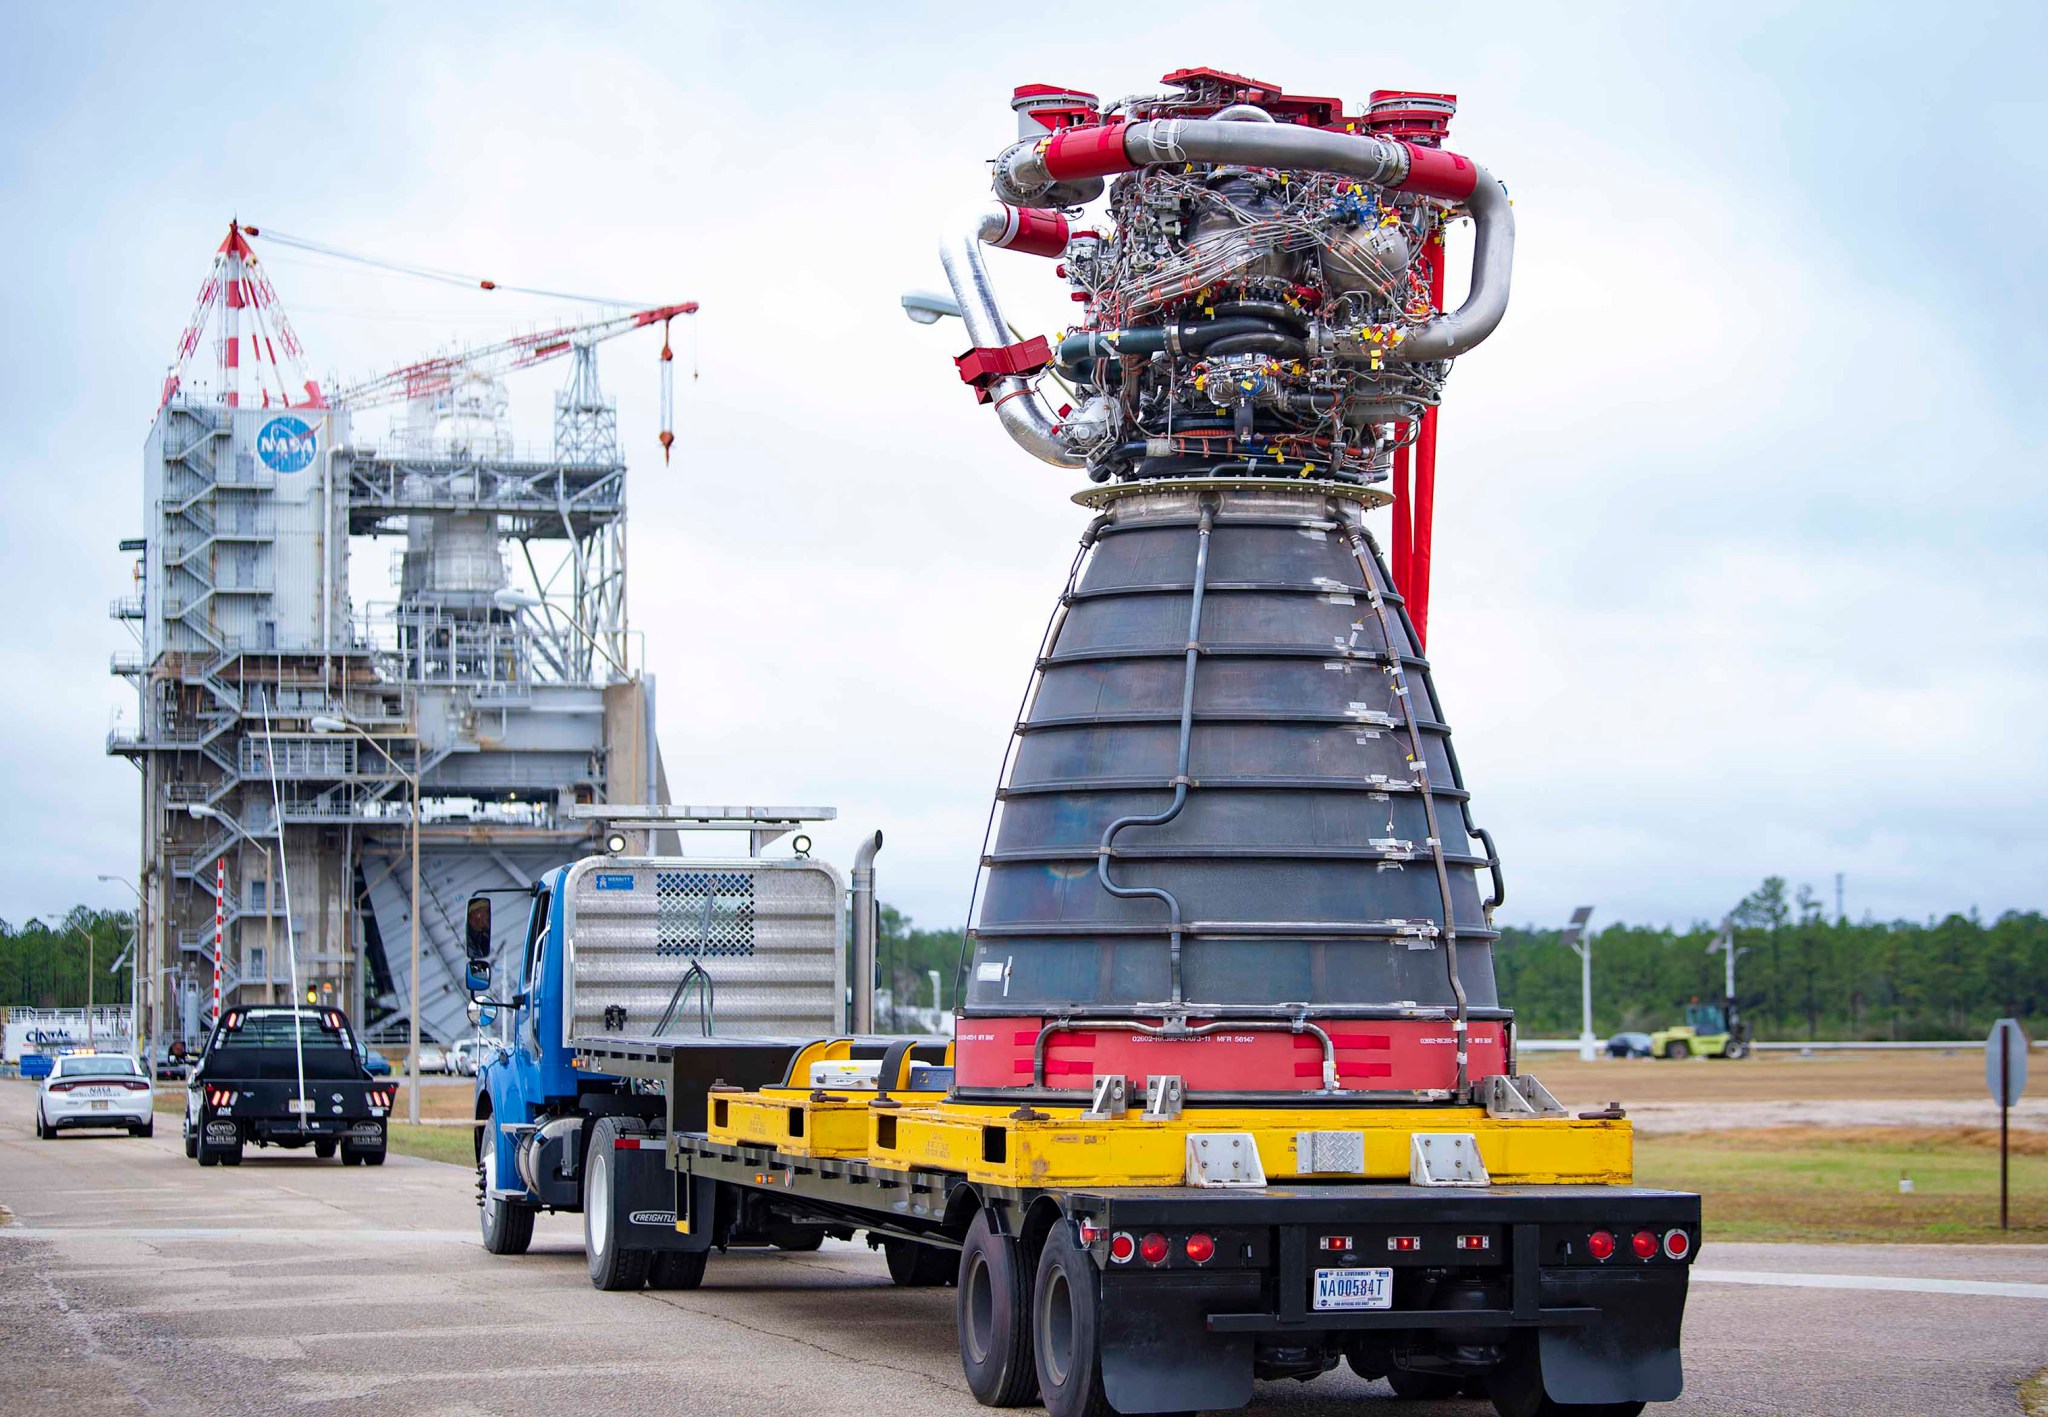 RS-25 engine, E10001, is delivered to the Fred Haise Test Stand at NASA’s Stennis Space Center